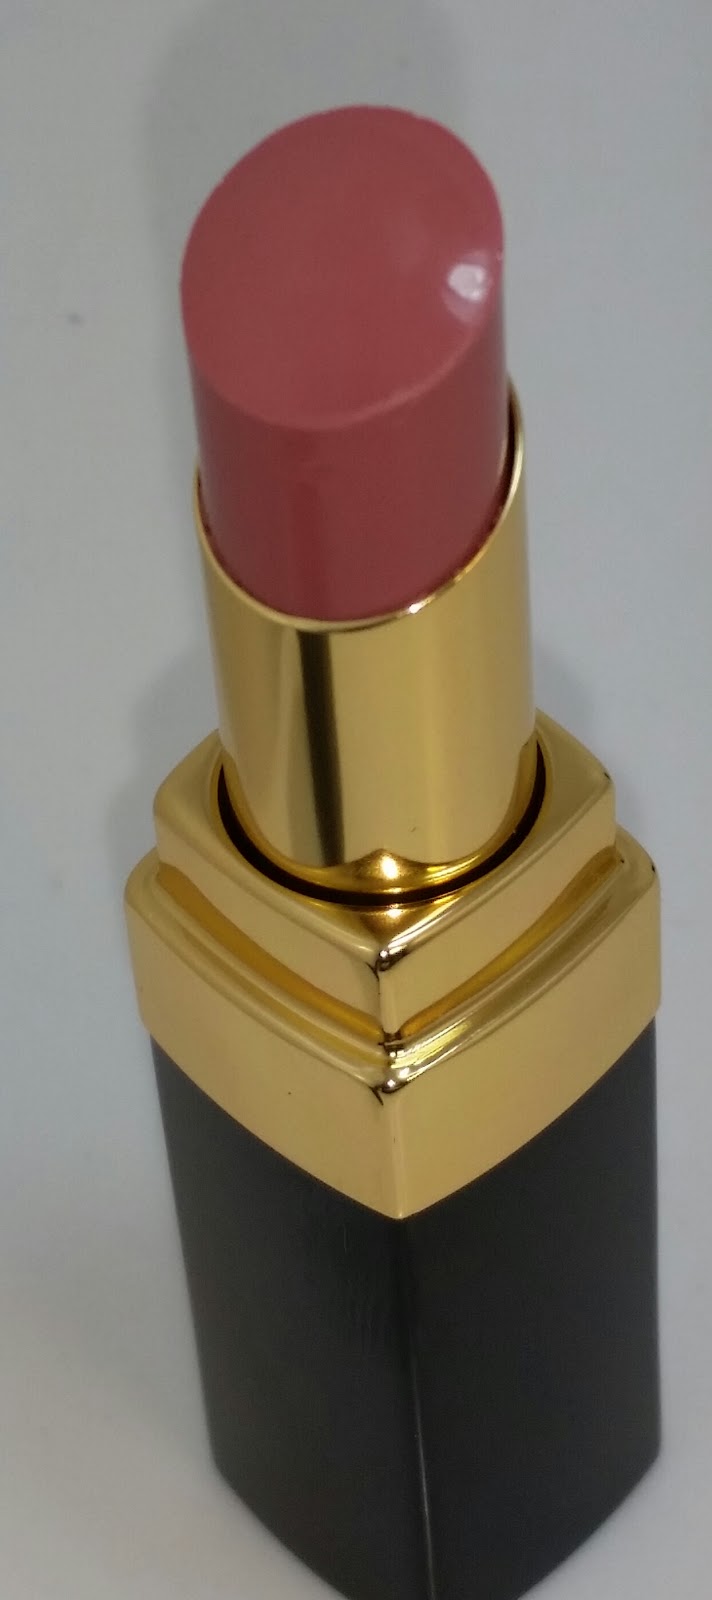 Jayded Dreaming Beauty Blog : 93 INTIME CHANEL ROUGE COCO SHINE HYDRATING  SHEER LIPSHINE - SWATCHES AND REVIEW